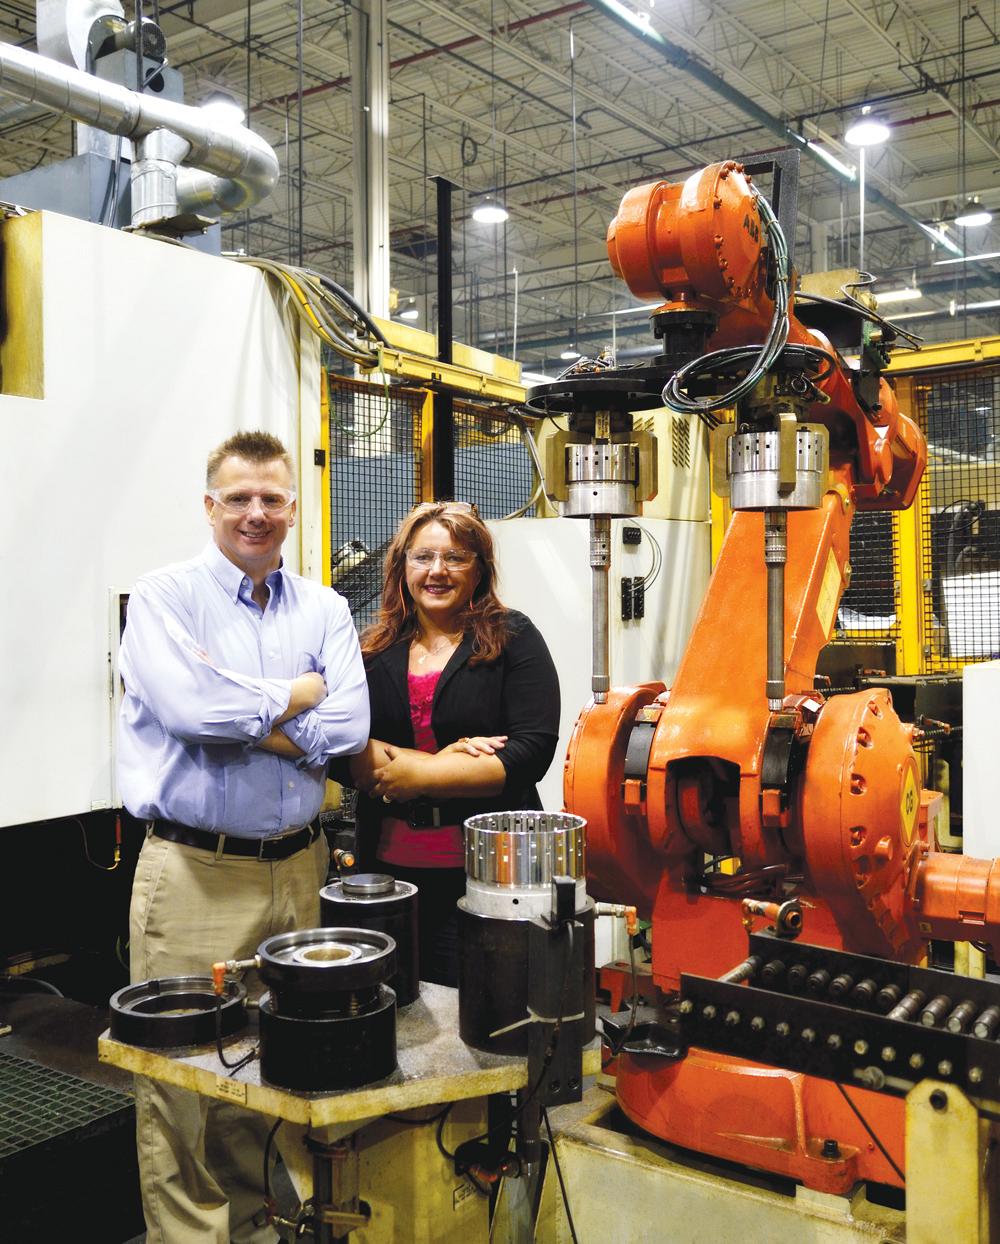 Linamar Gear’s Craig Ferneyhough, general manager, and Ania Kreft, quality manager, pose with transmission parts and assemblies by one of the shop’s robotic welding machines.